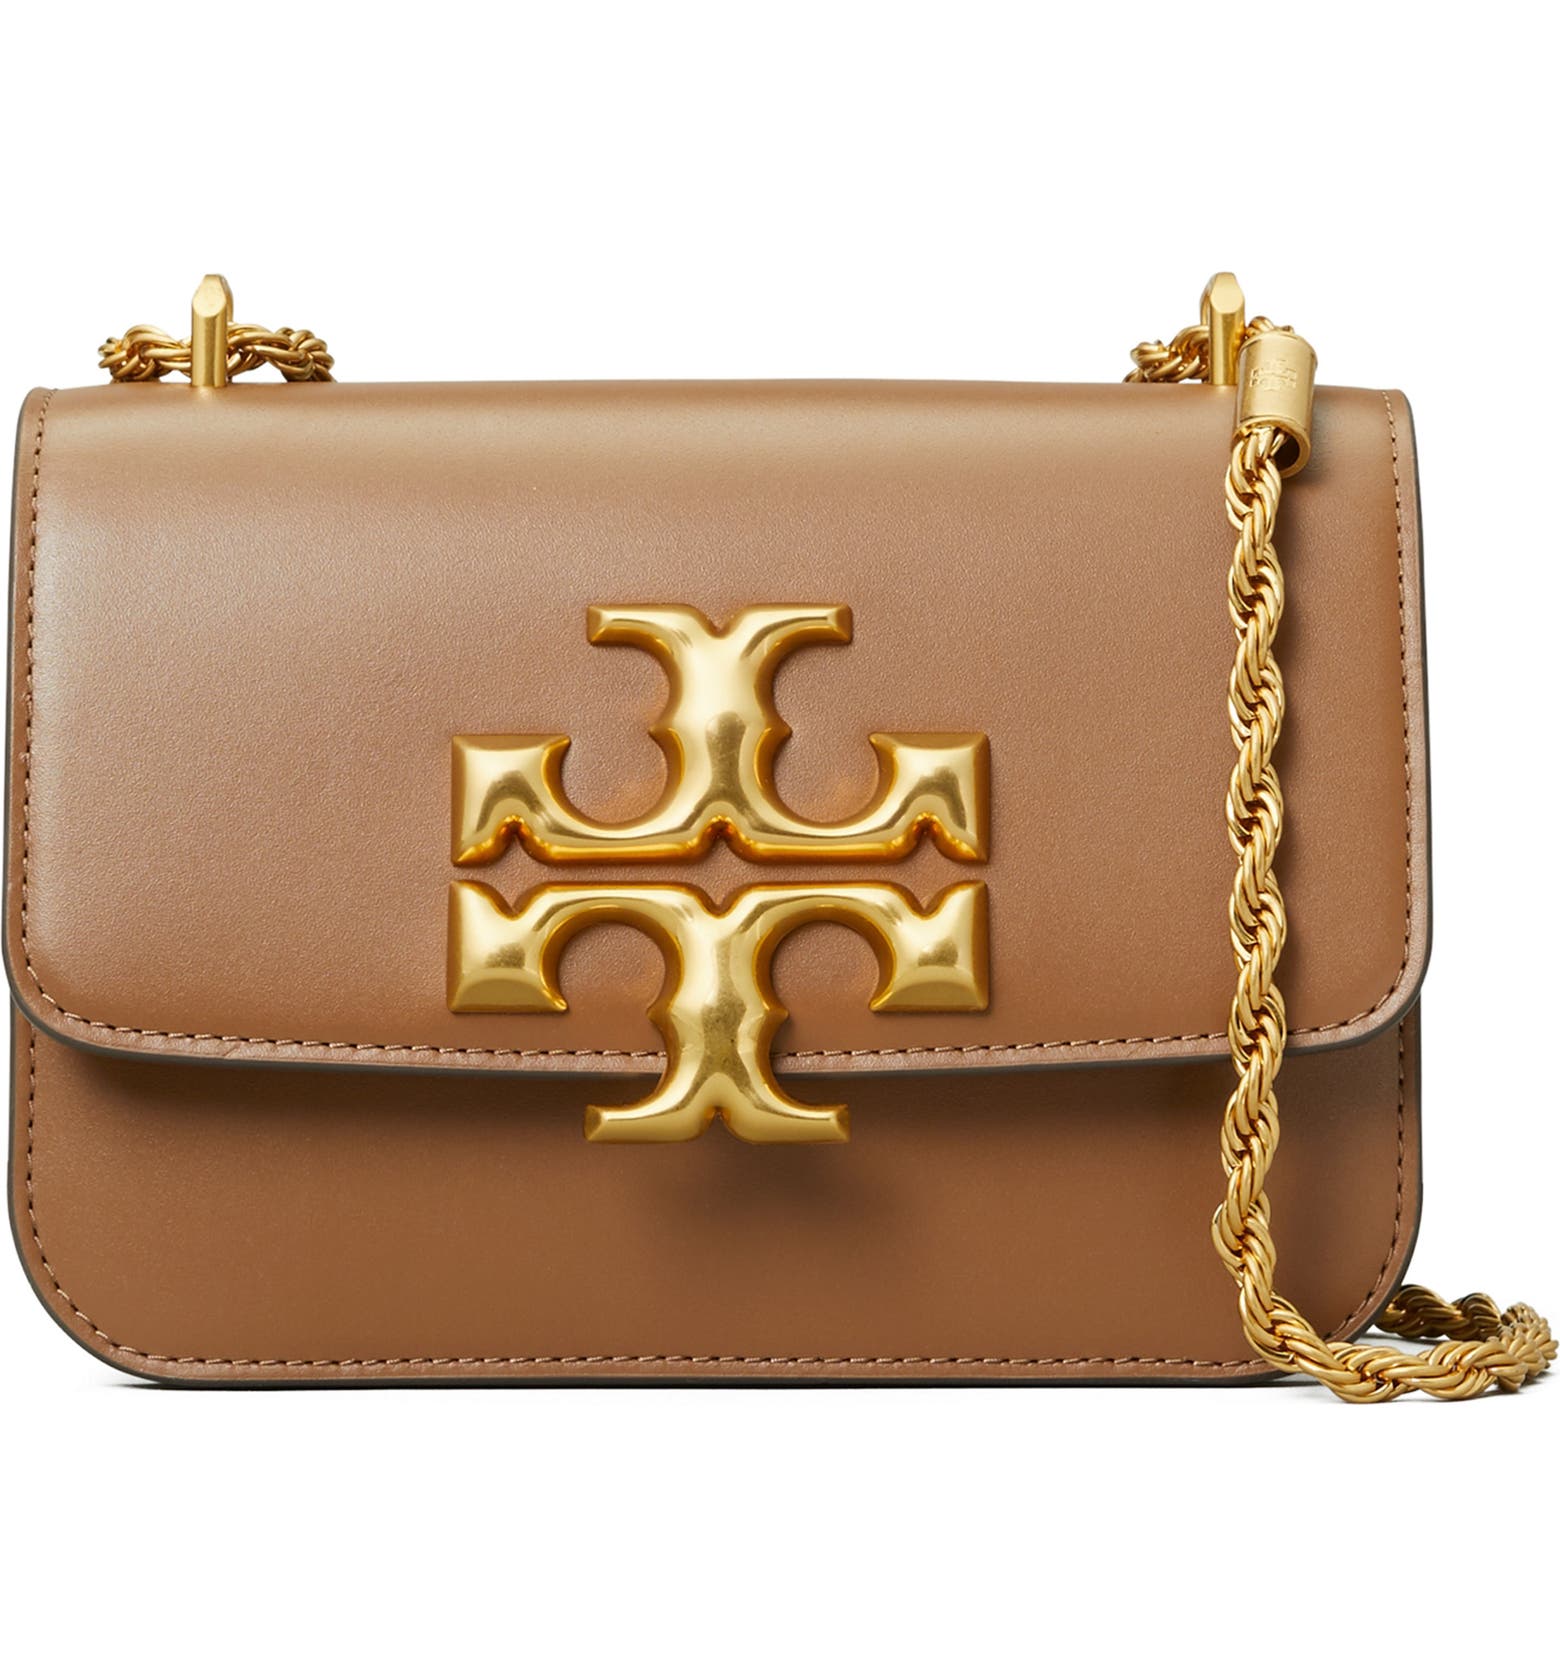 Tory Burch Vs Coach: Which Is The Better Brand For You?